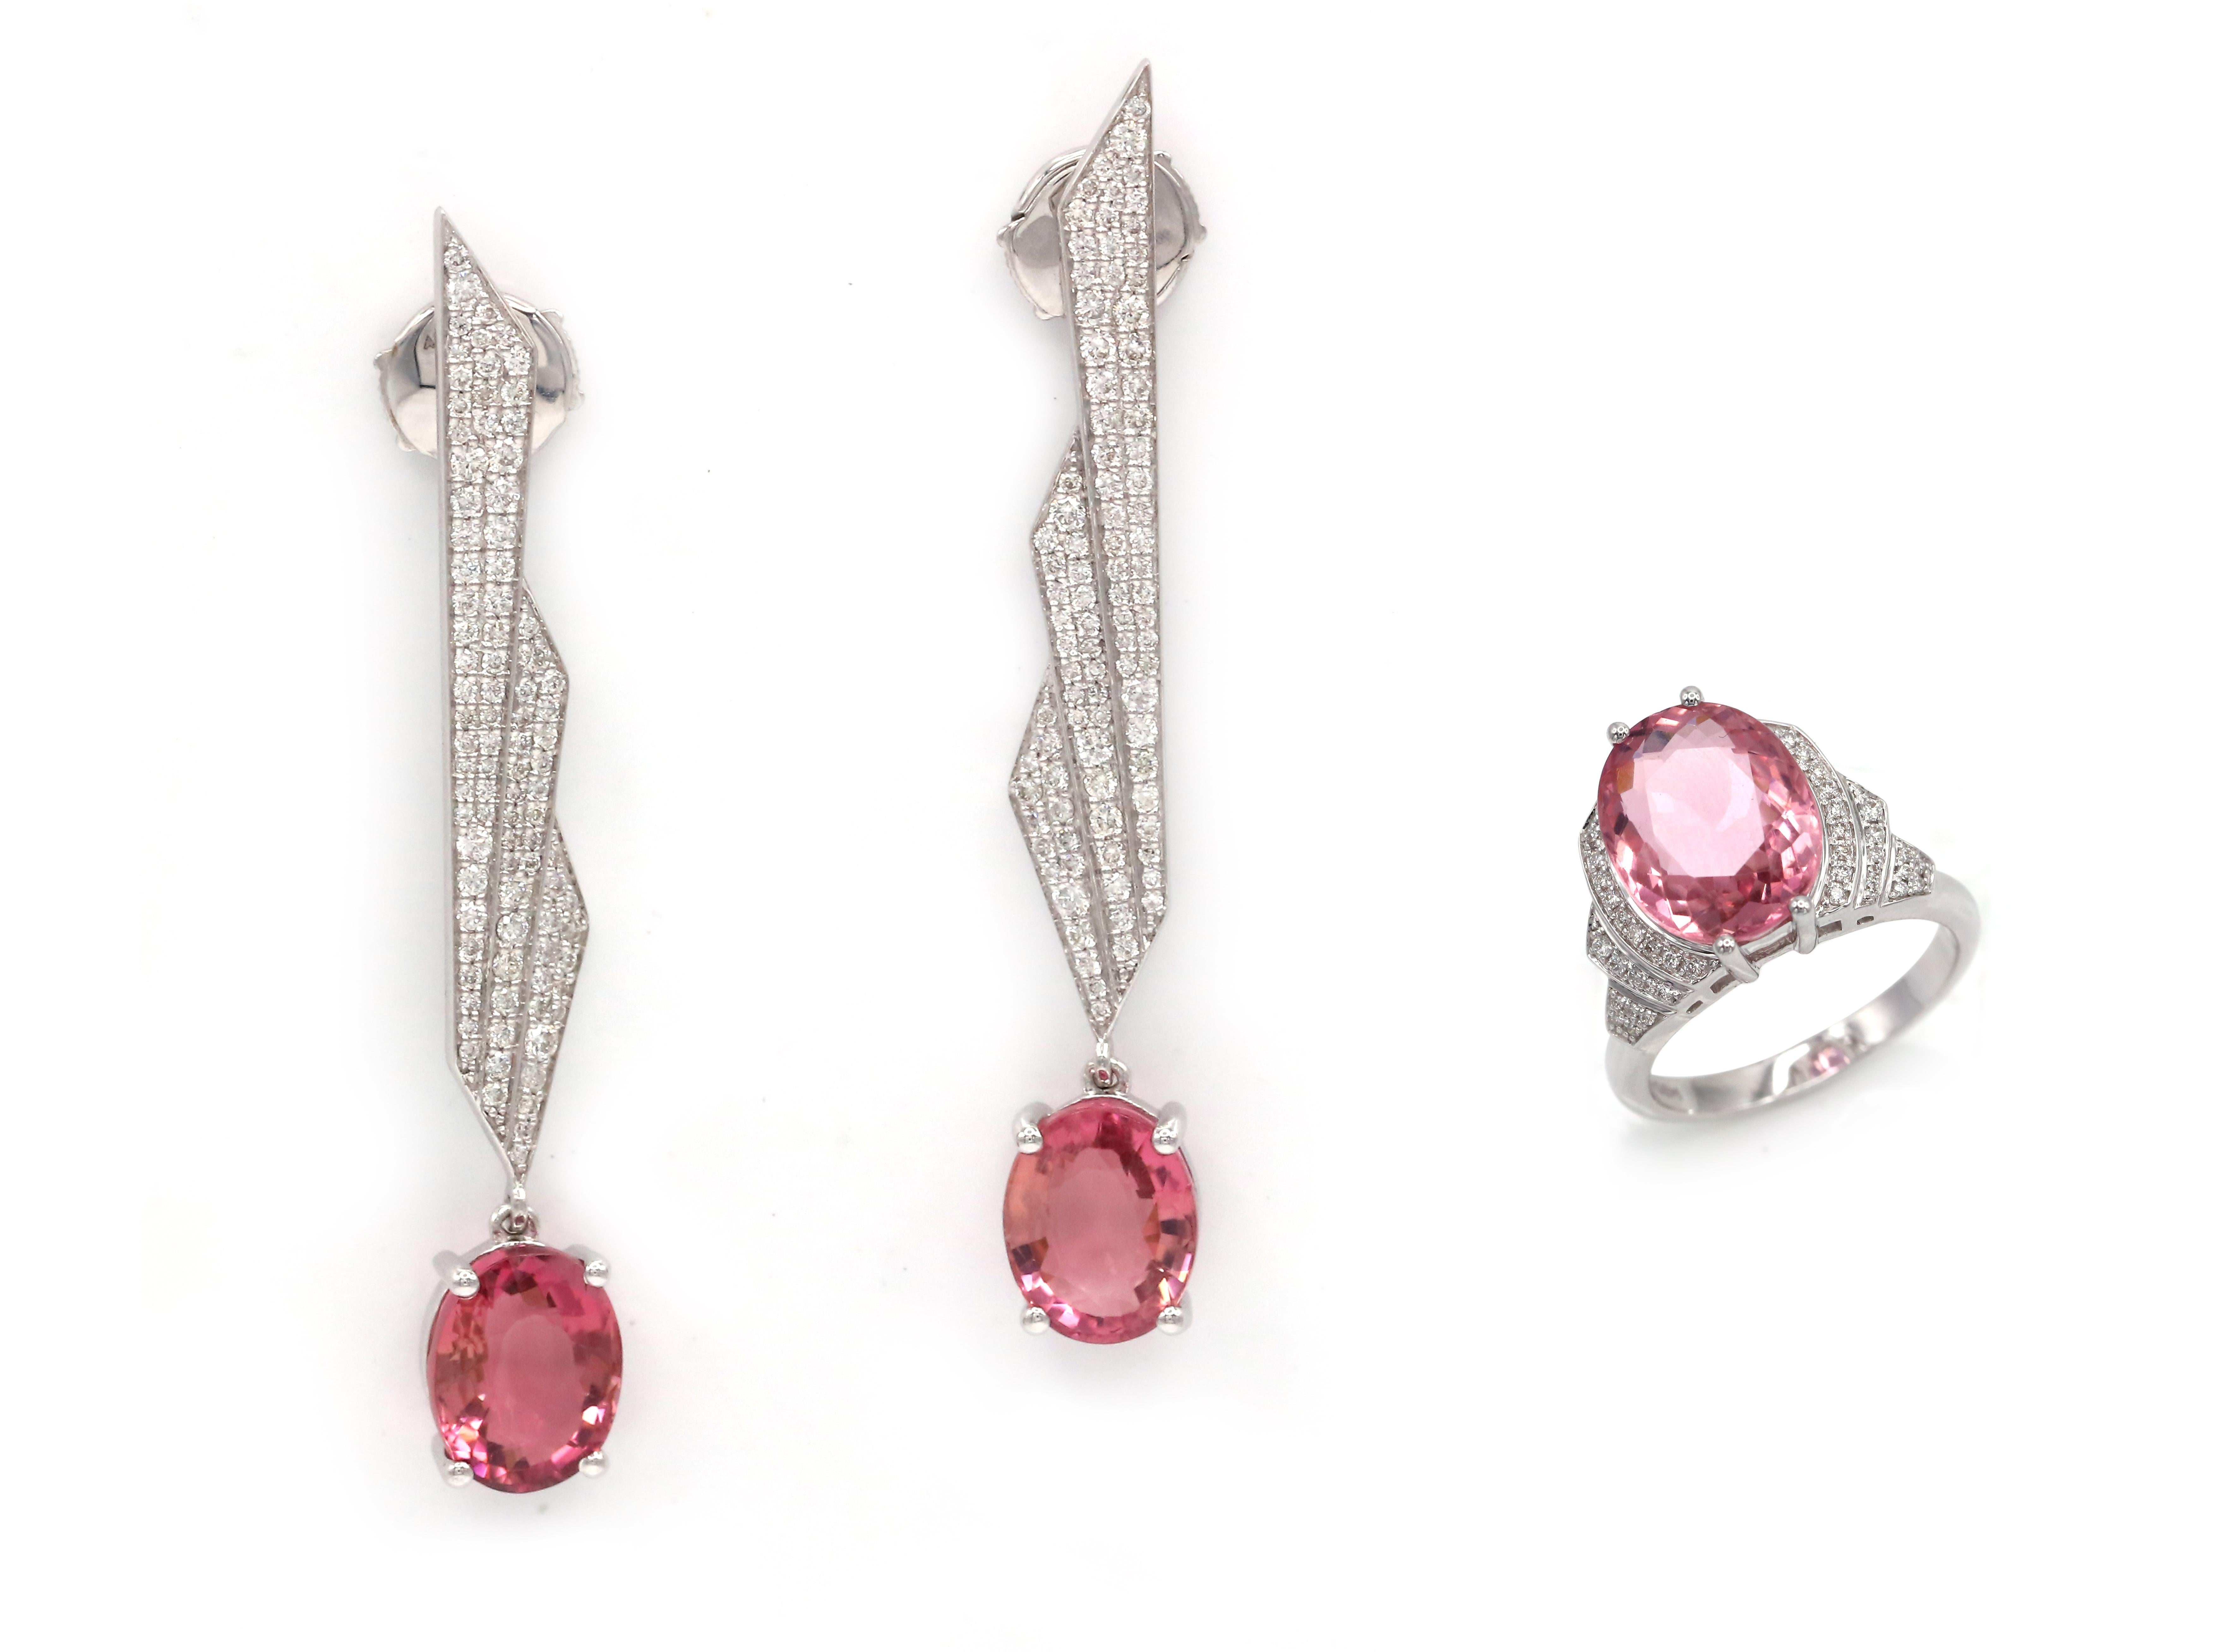 Oval Cut 6.5 Carat Pink Tourmaline Diamond 18 K White Gold Cocktail Earrings For Sale